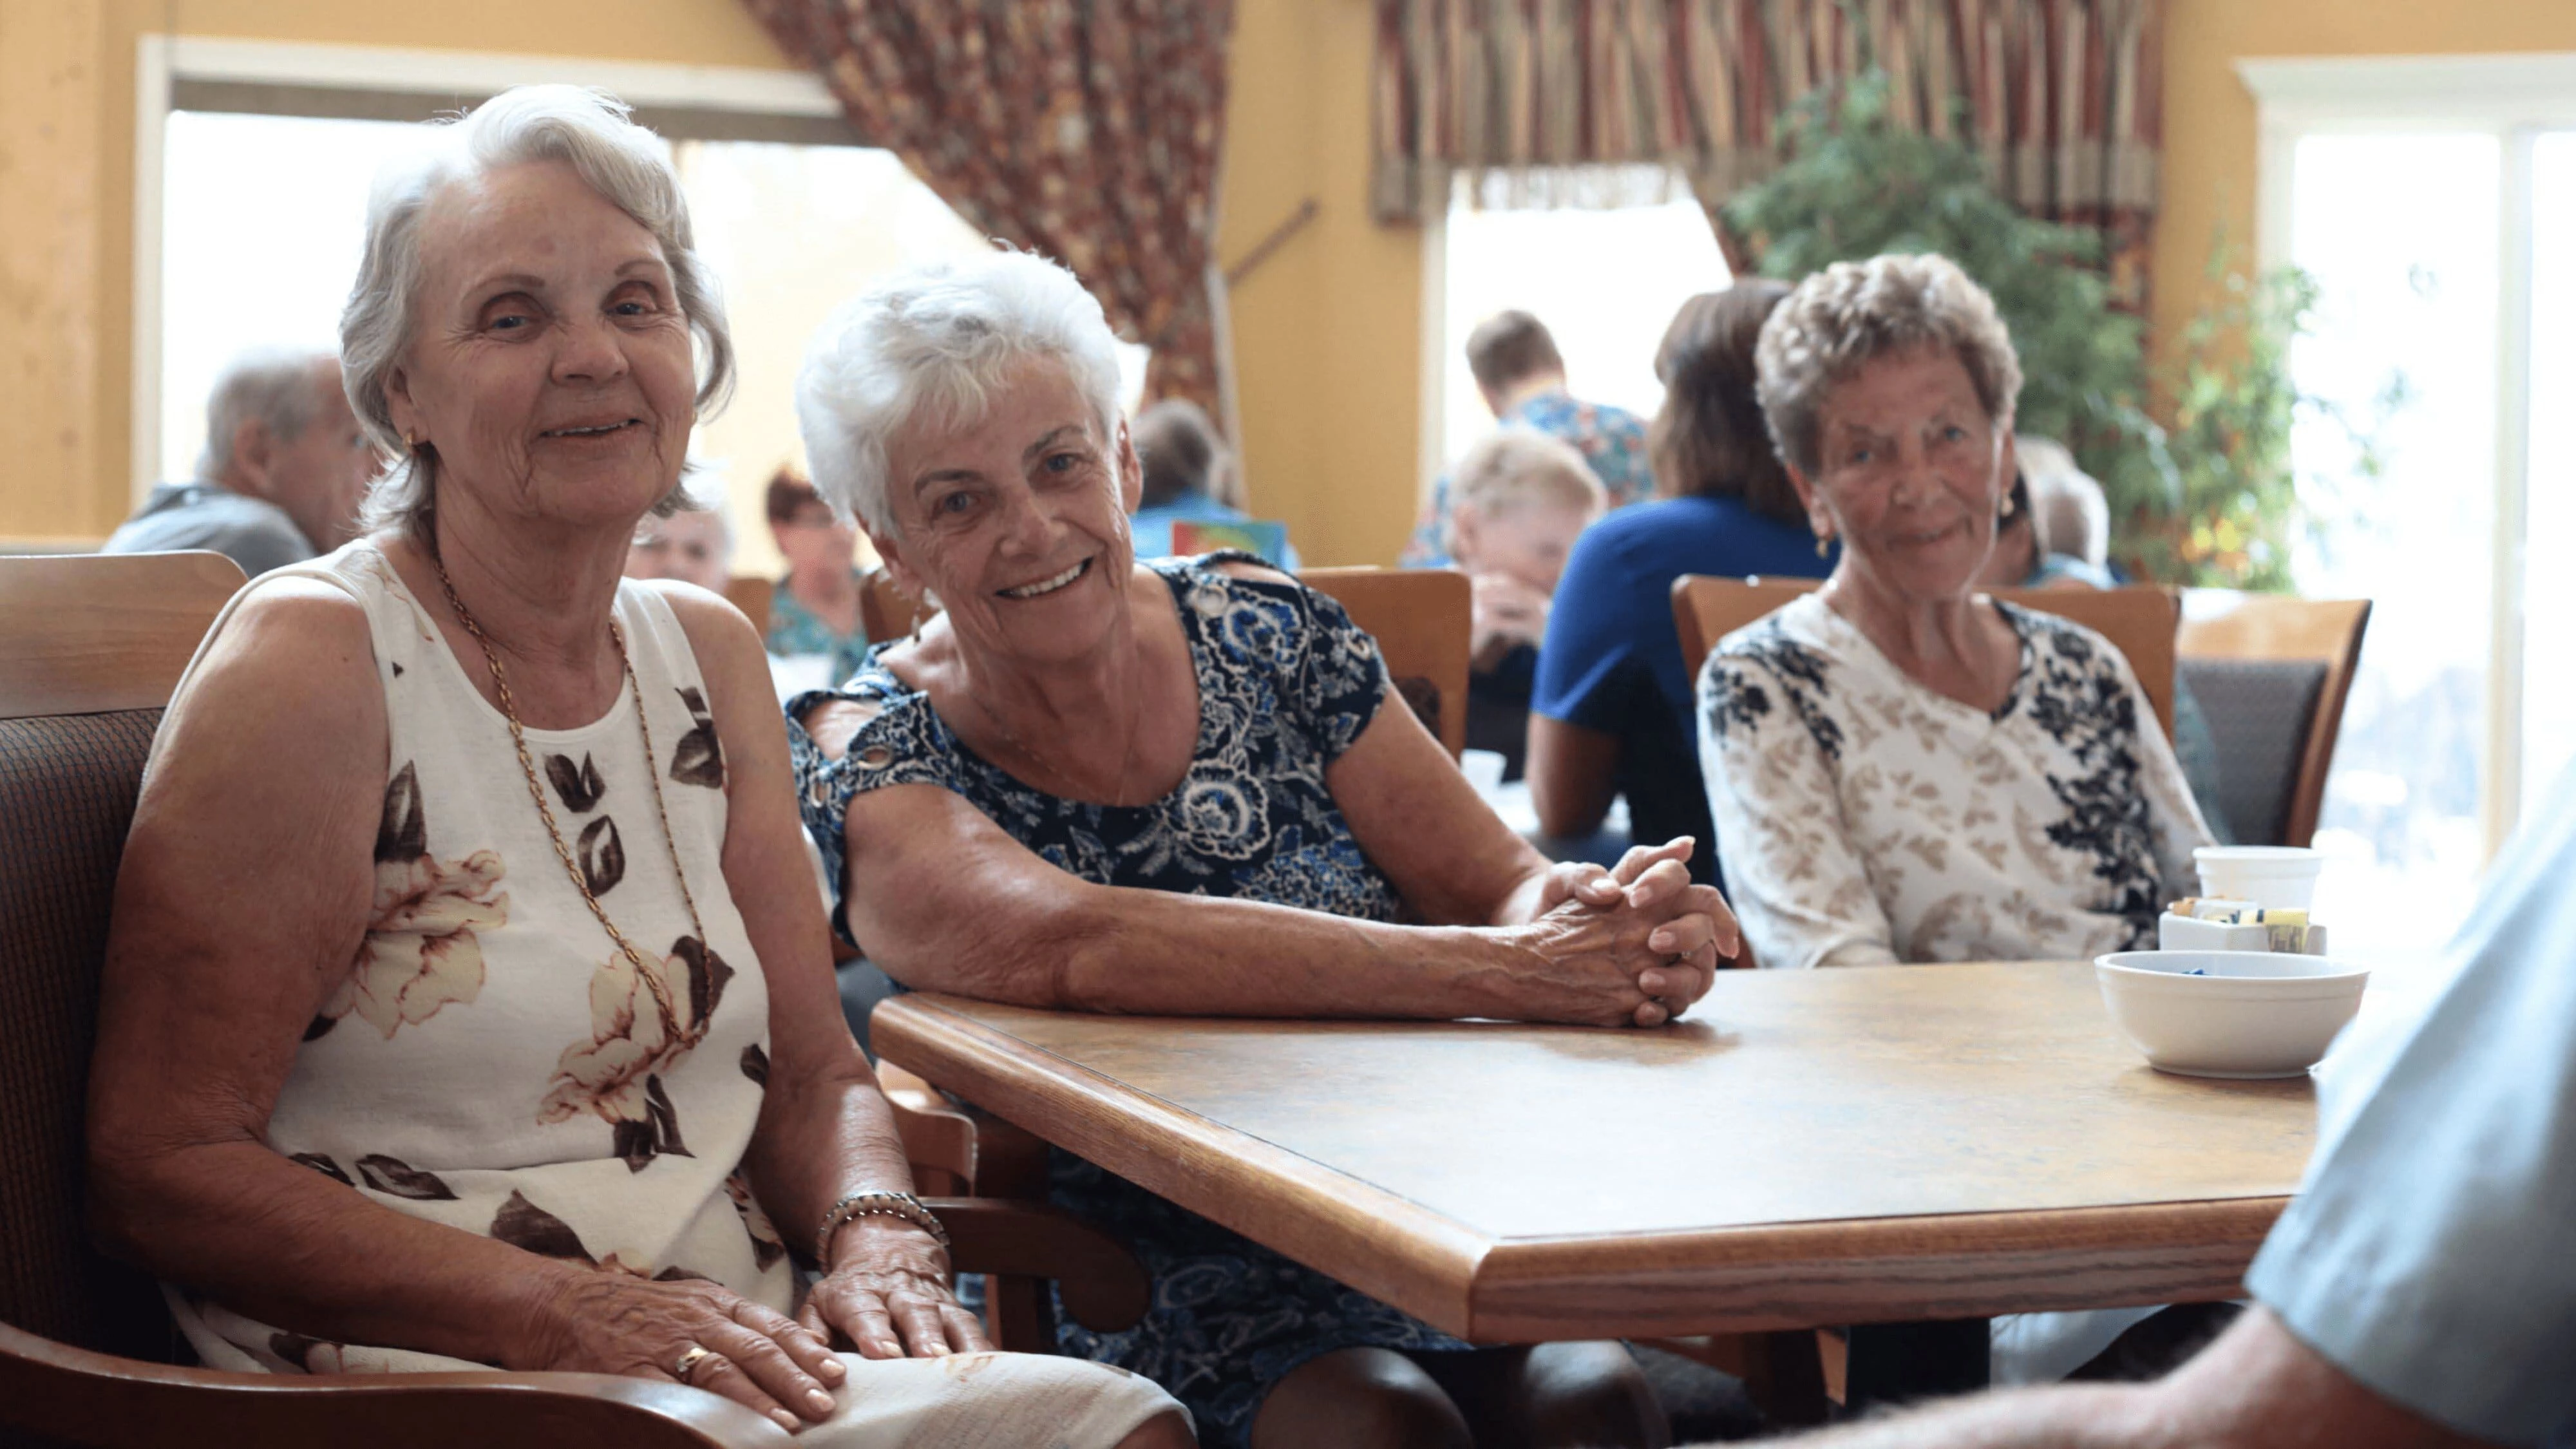 At Cottonwood Village, a group of senior women are having lunch.